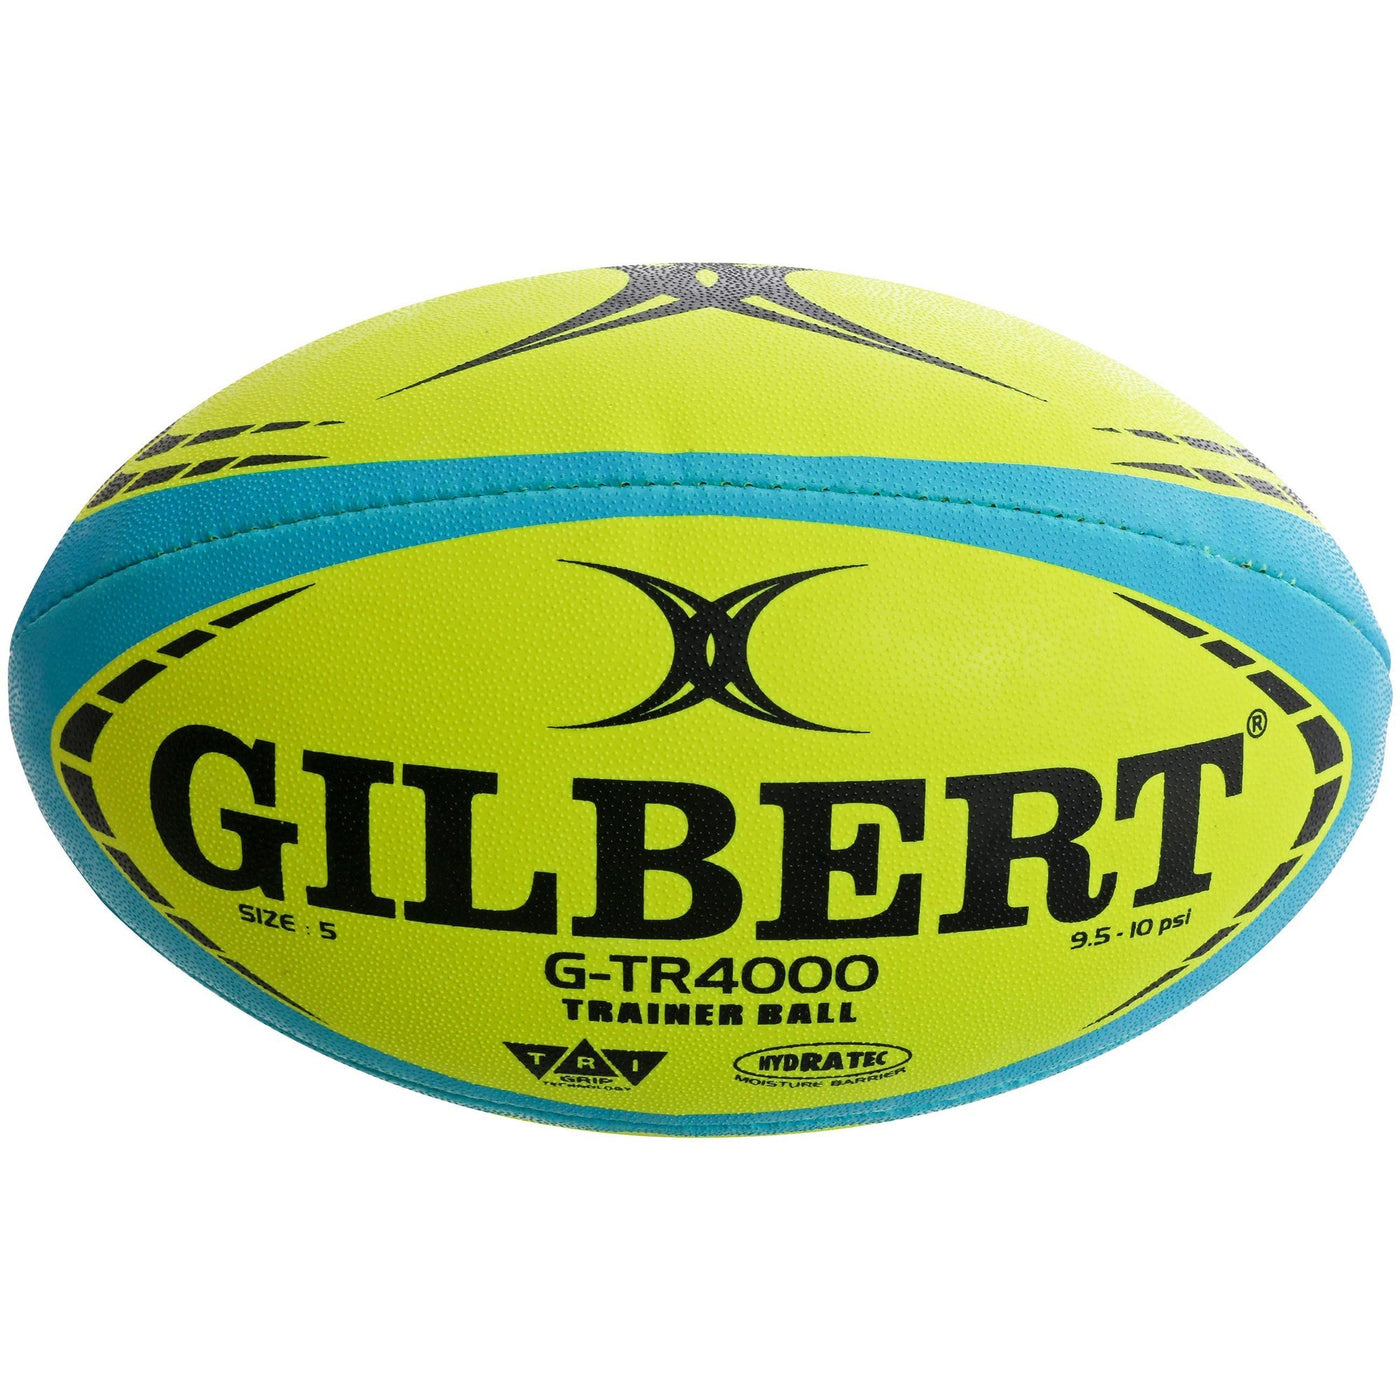 G-TR4000 Ballon Rugby Jaune Fluo Taille 4